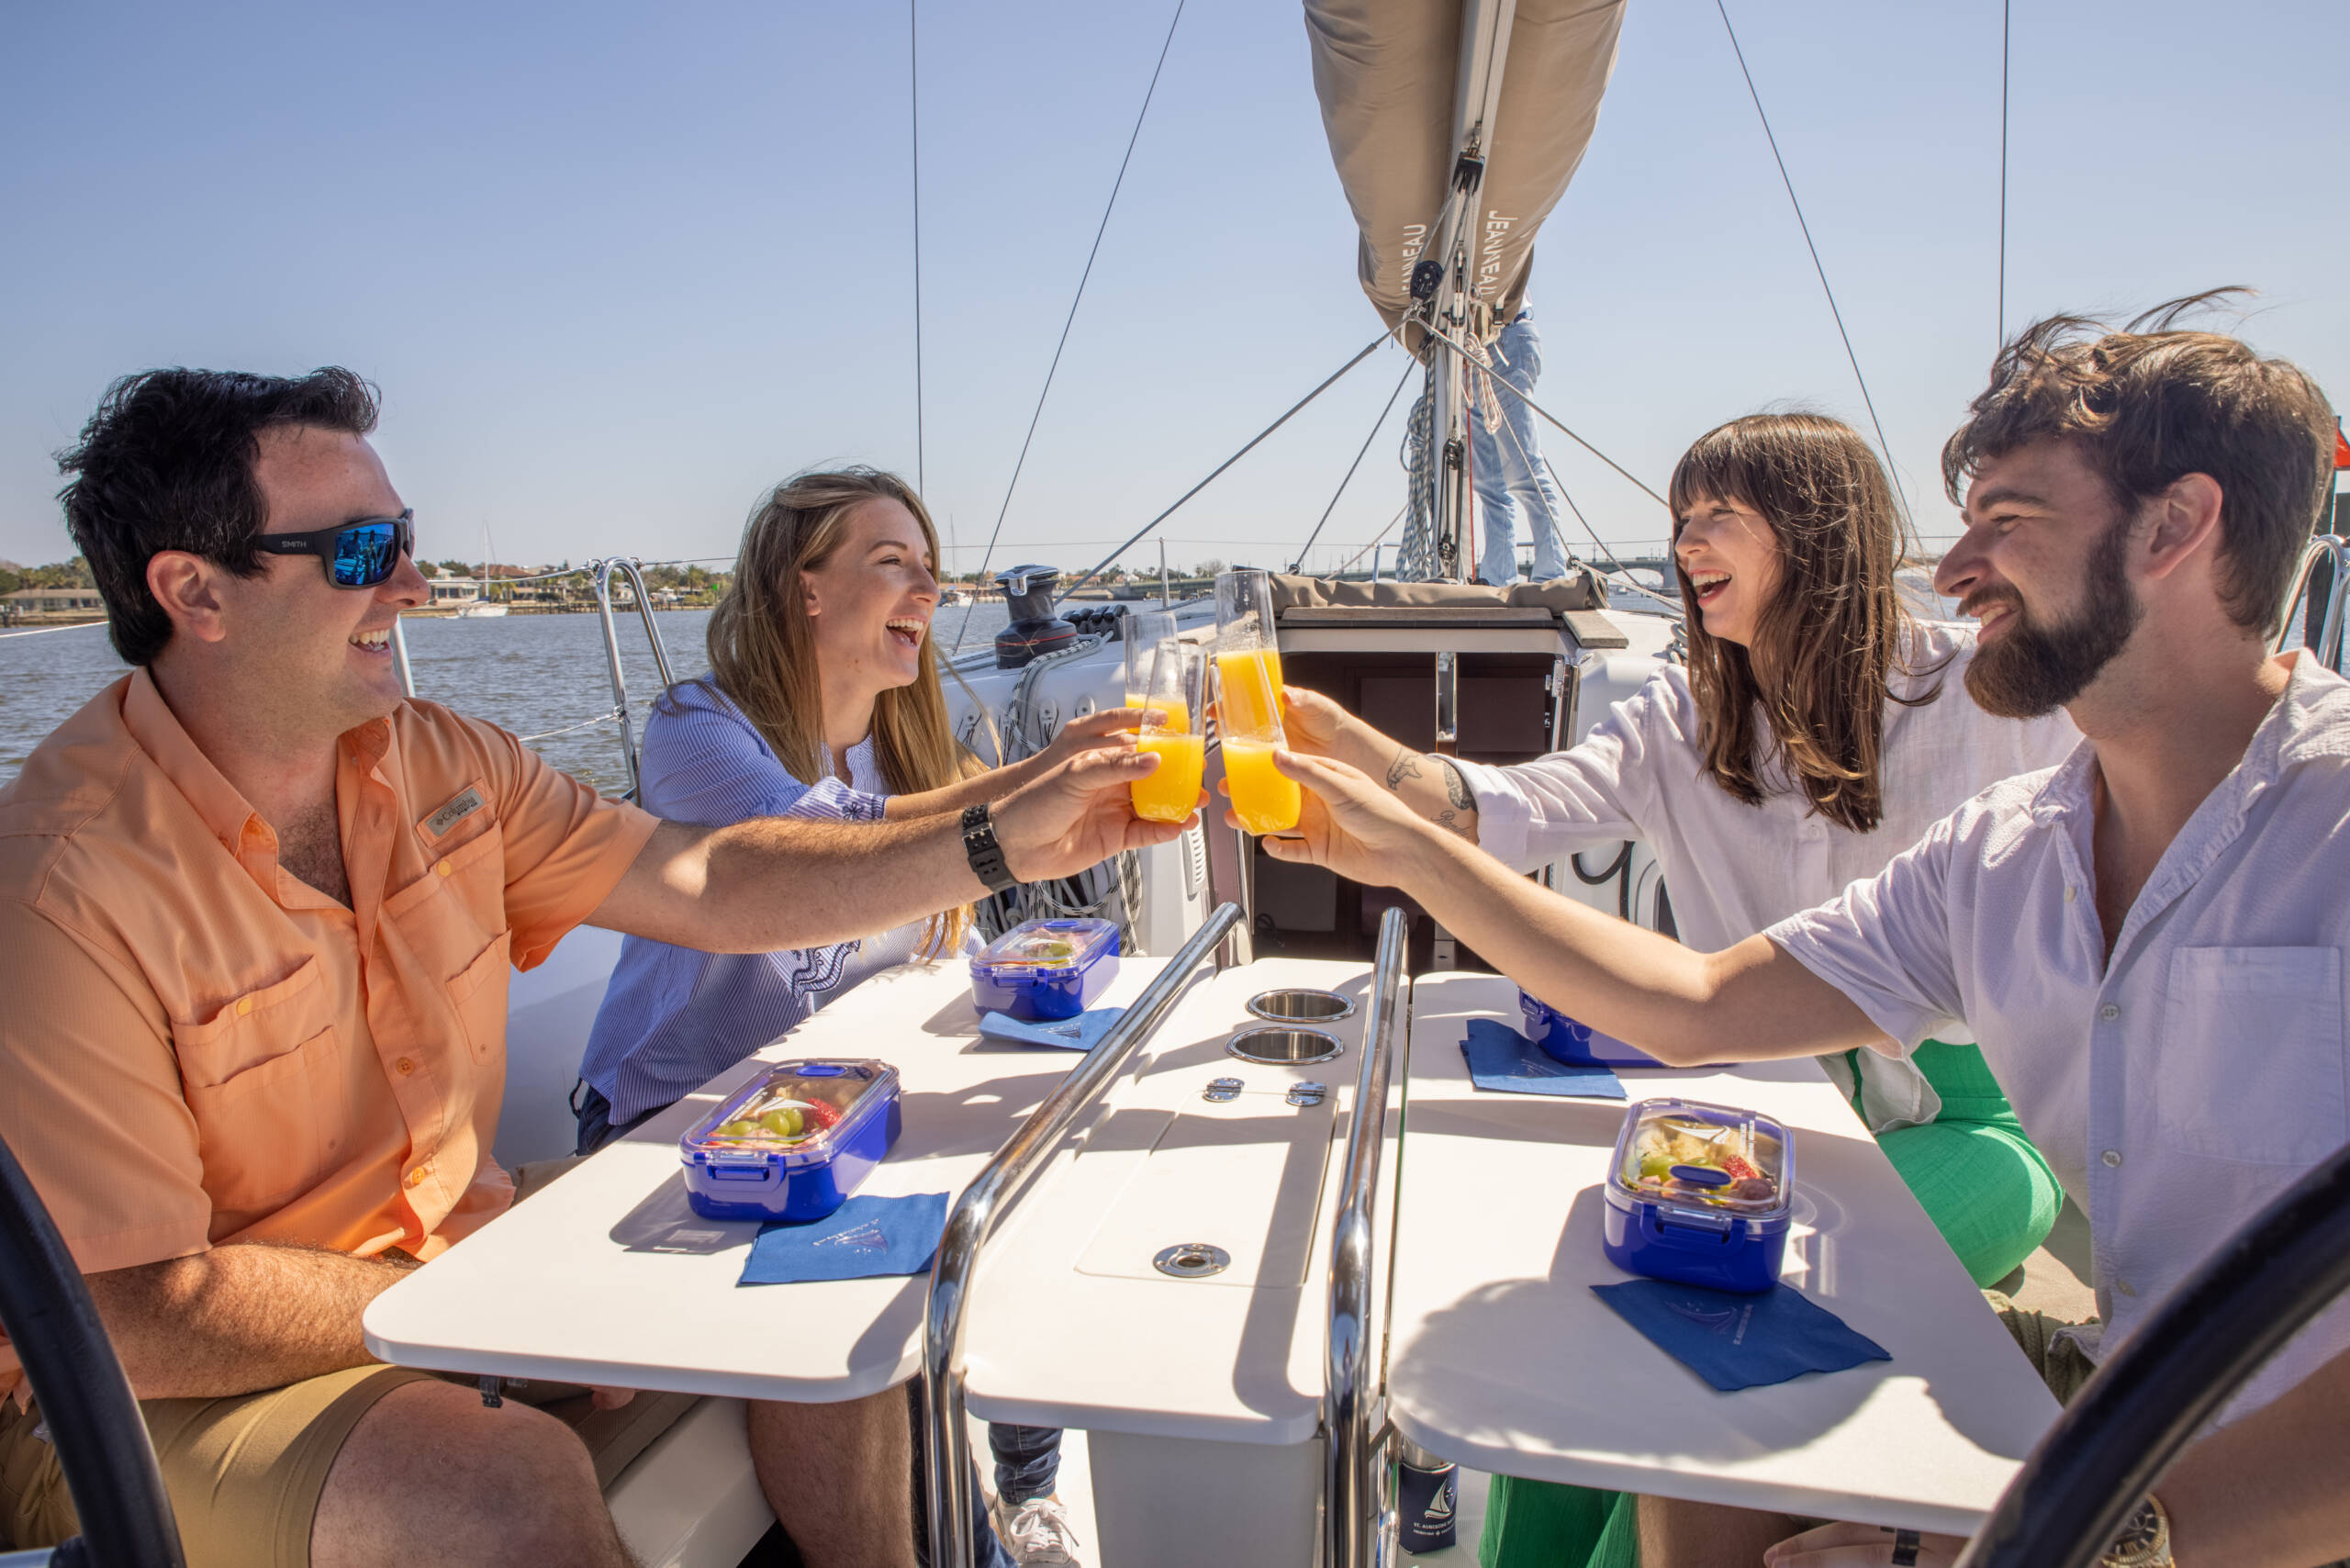 Indulge in the ultimate culinary delight with a brunch sailing experience in St Augustine. Join us aboard for an unforgettable journey where gourmet cuisine meets the open sea. Book your adventure today at 904-829-0648